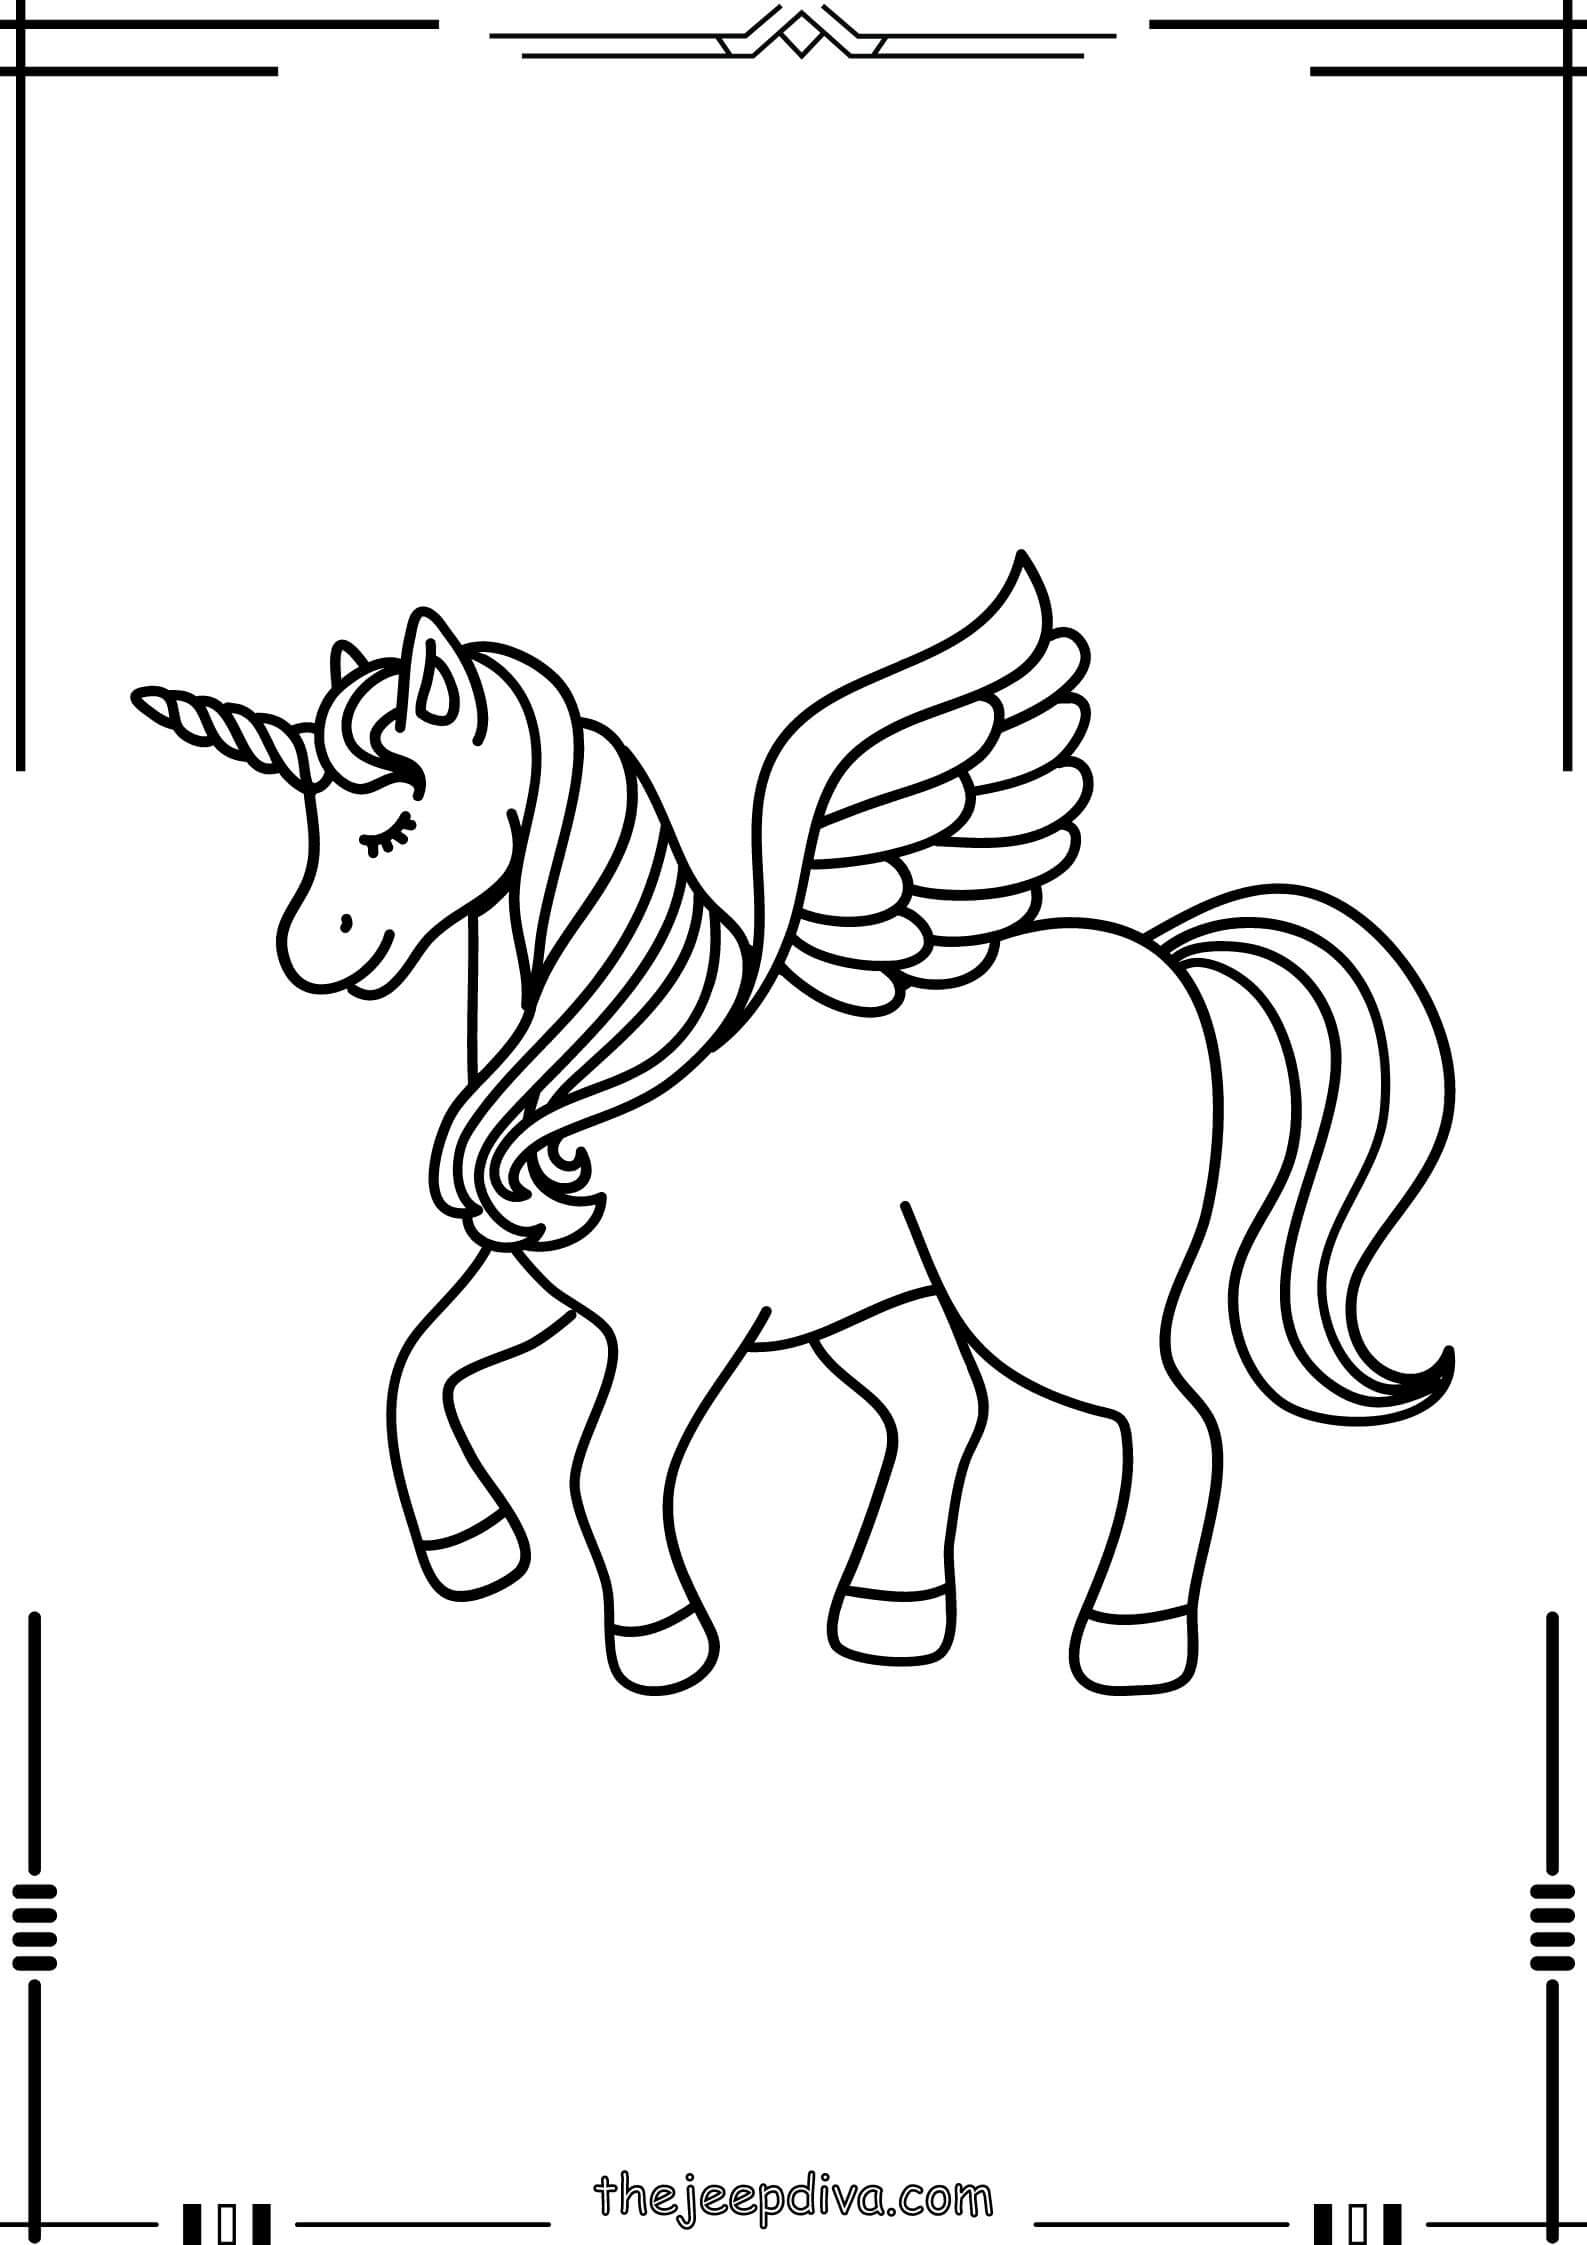 unicorn-coloring-page-easy-12